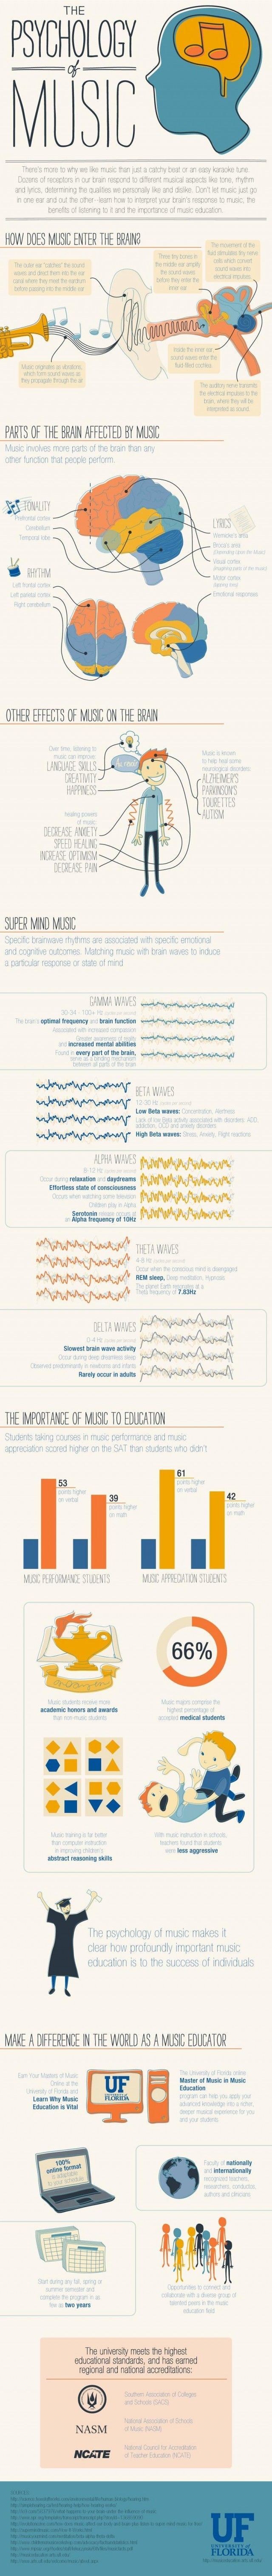 The Psychology of Music [infographic] Let’s keep it in school curriculum!